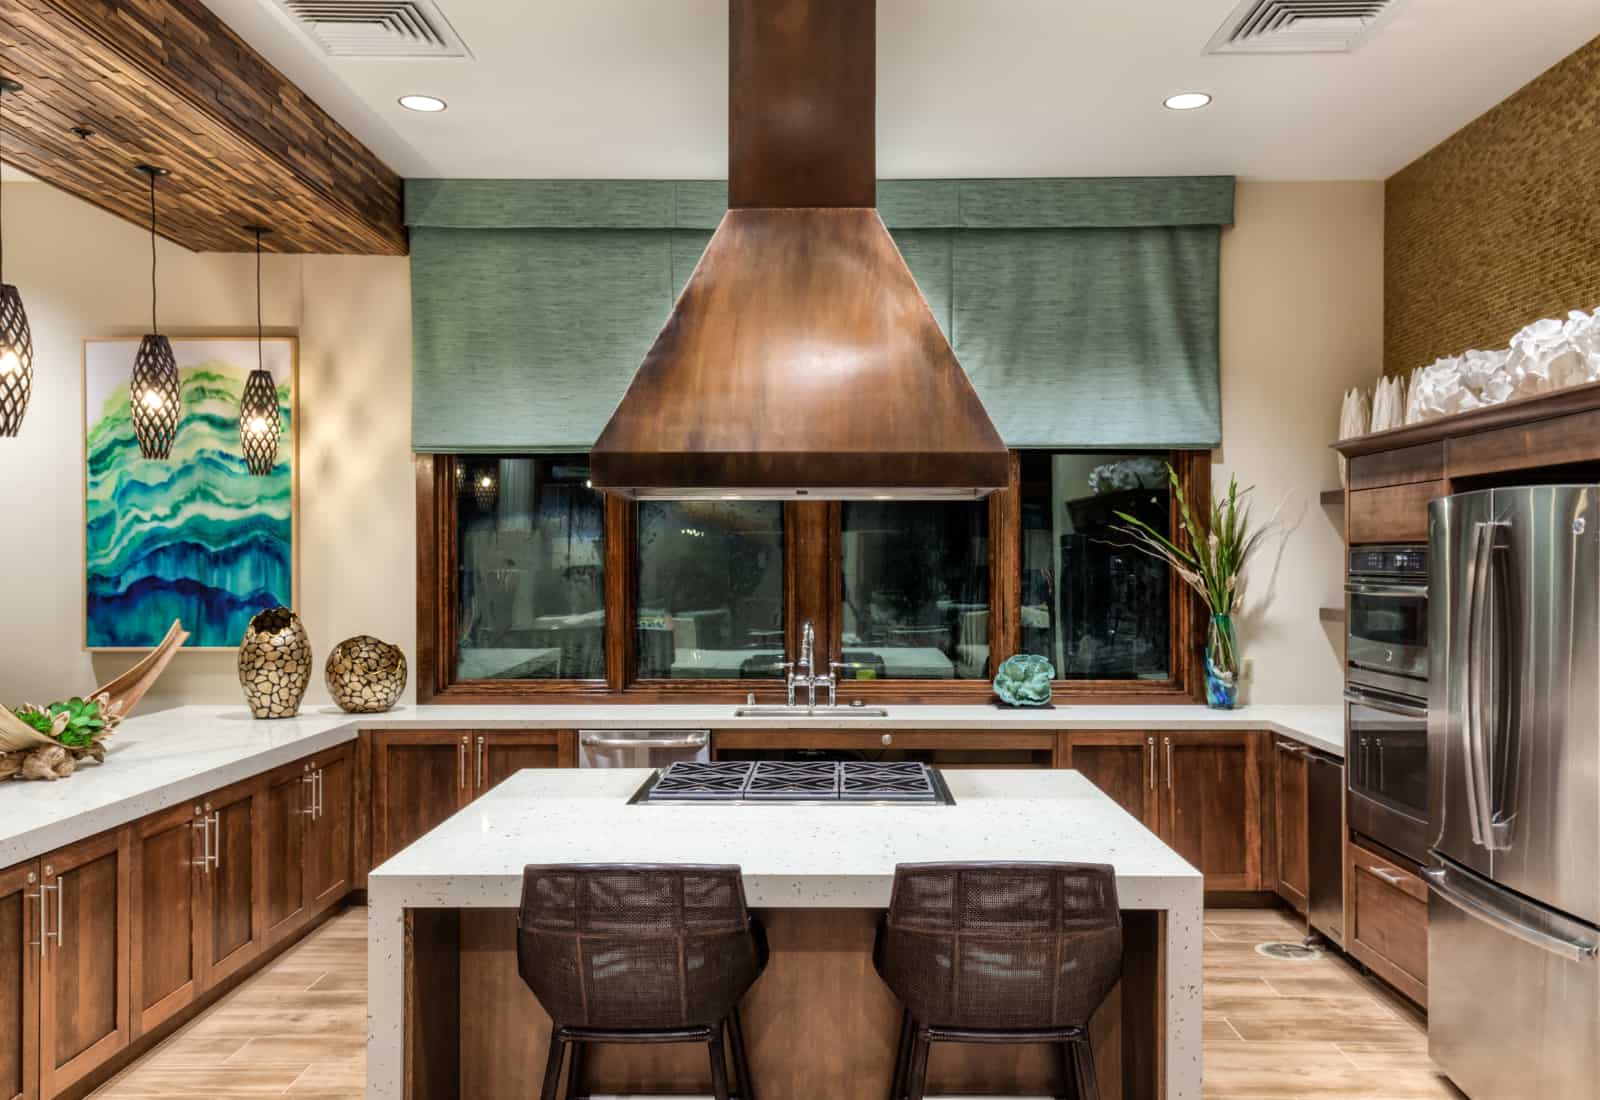 Interior of large kitchen with stainless steel appliances, central island with cooktop and seating.